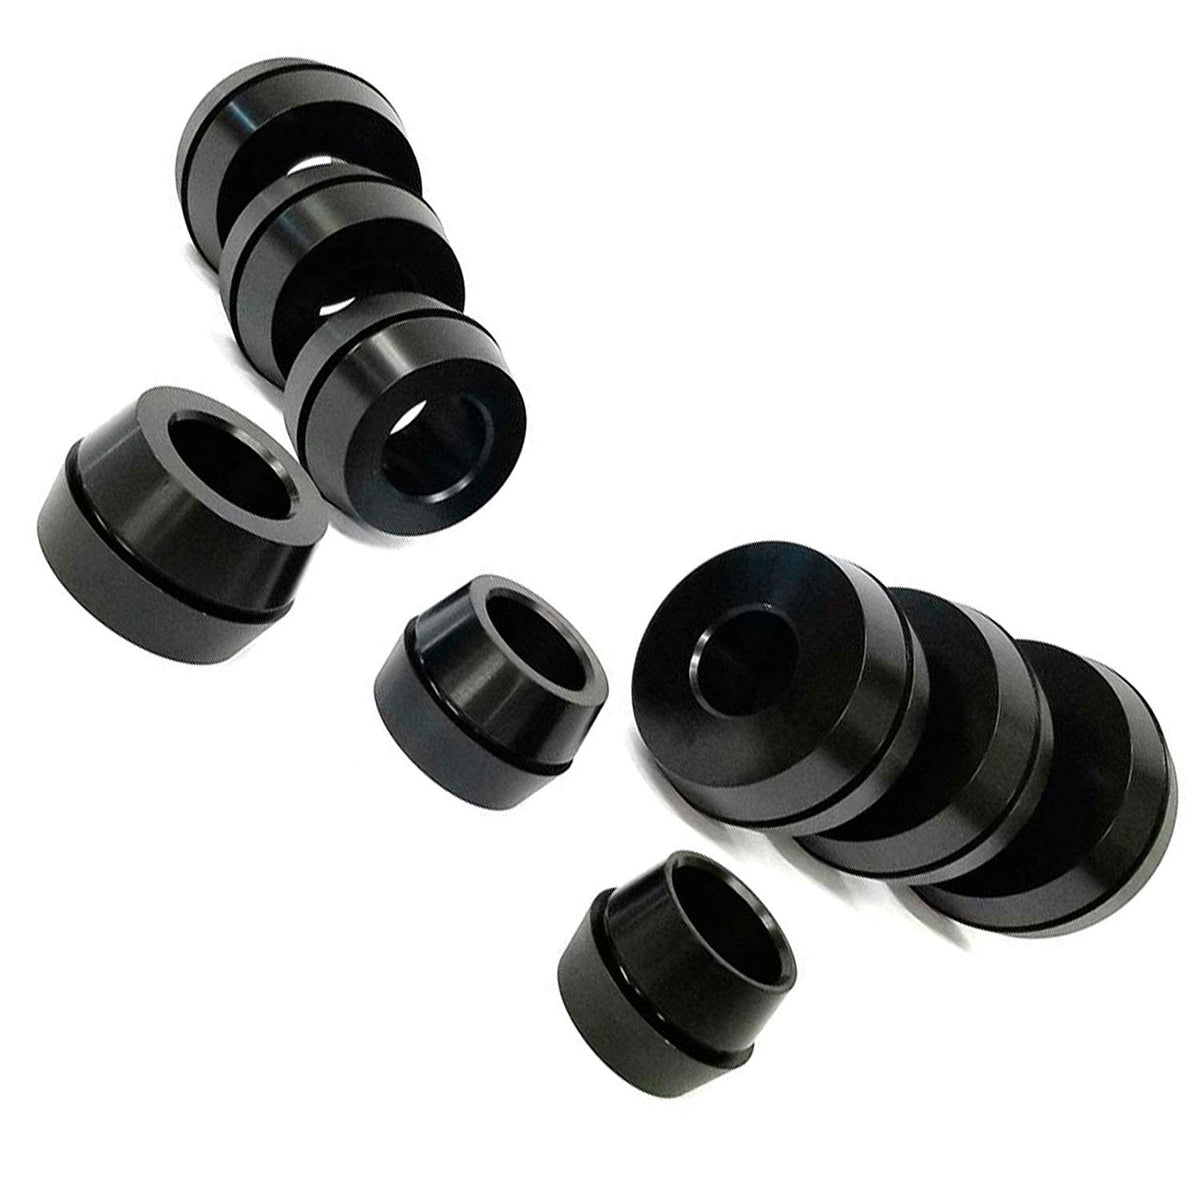 Haweka 9-Piece Double Sided Low Taper Collet Kit, 40mm